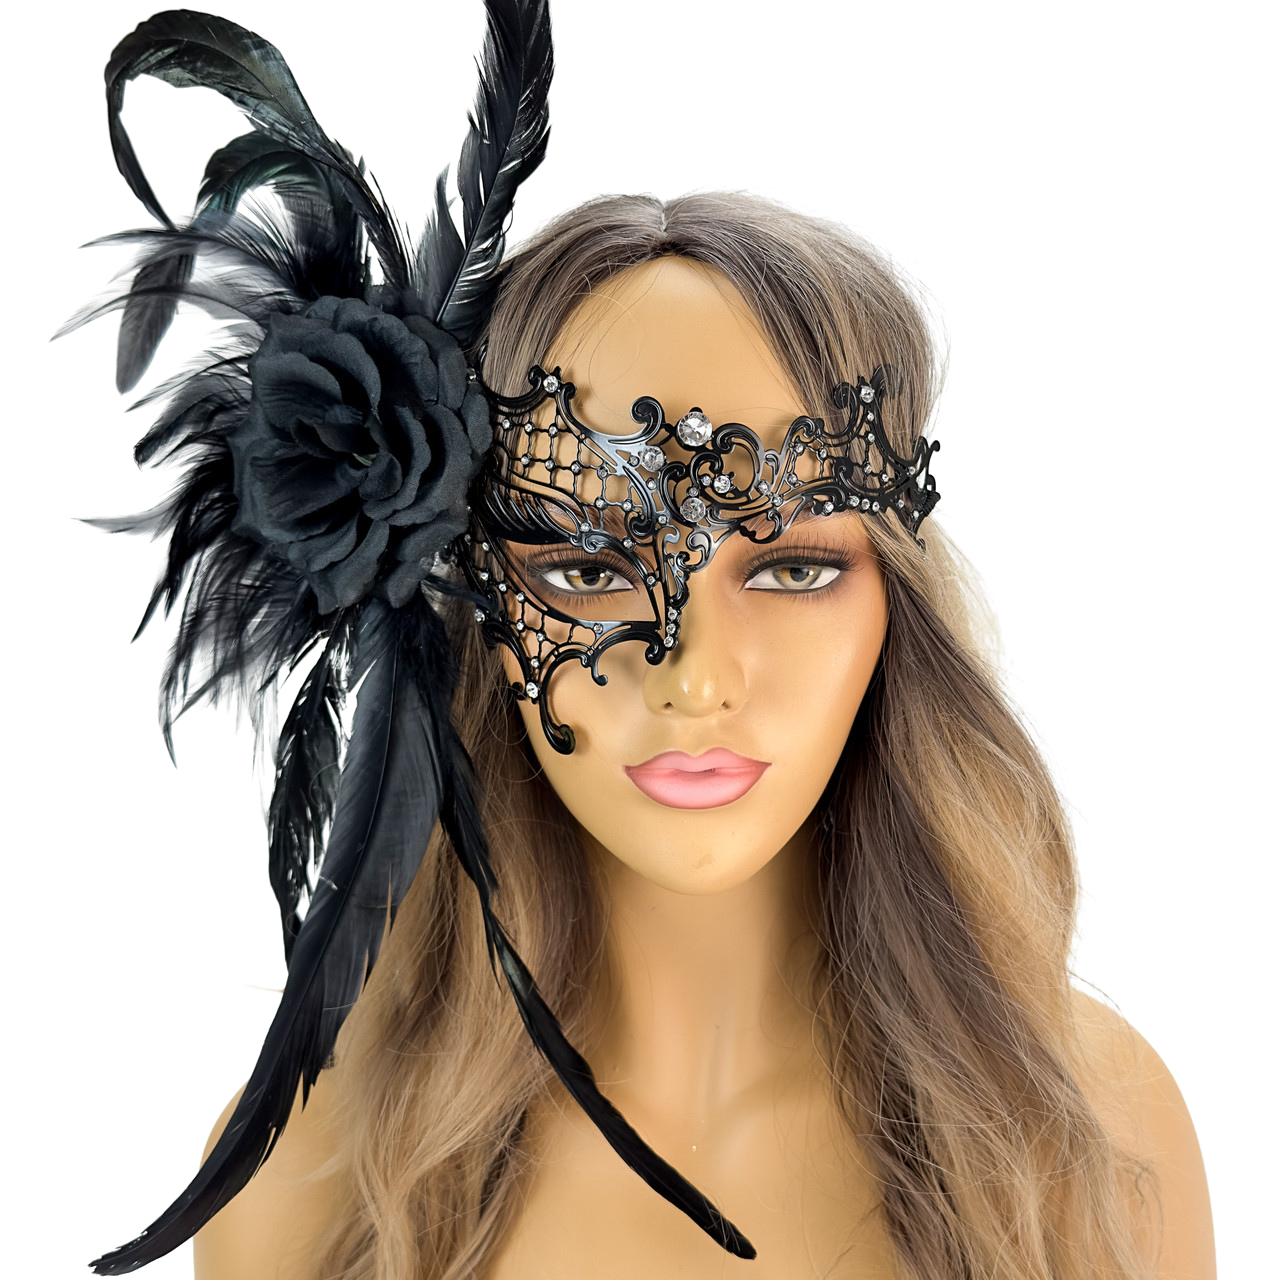 Black Masquerade Ball Mask Flower Prom Wedding Halloween Cosplay Mask by